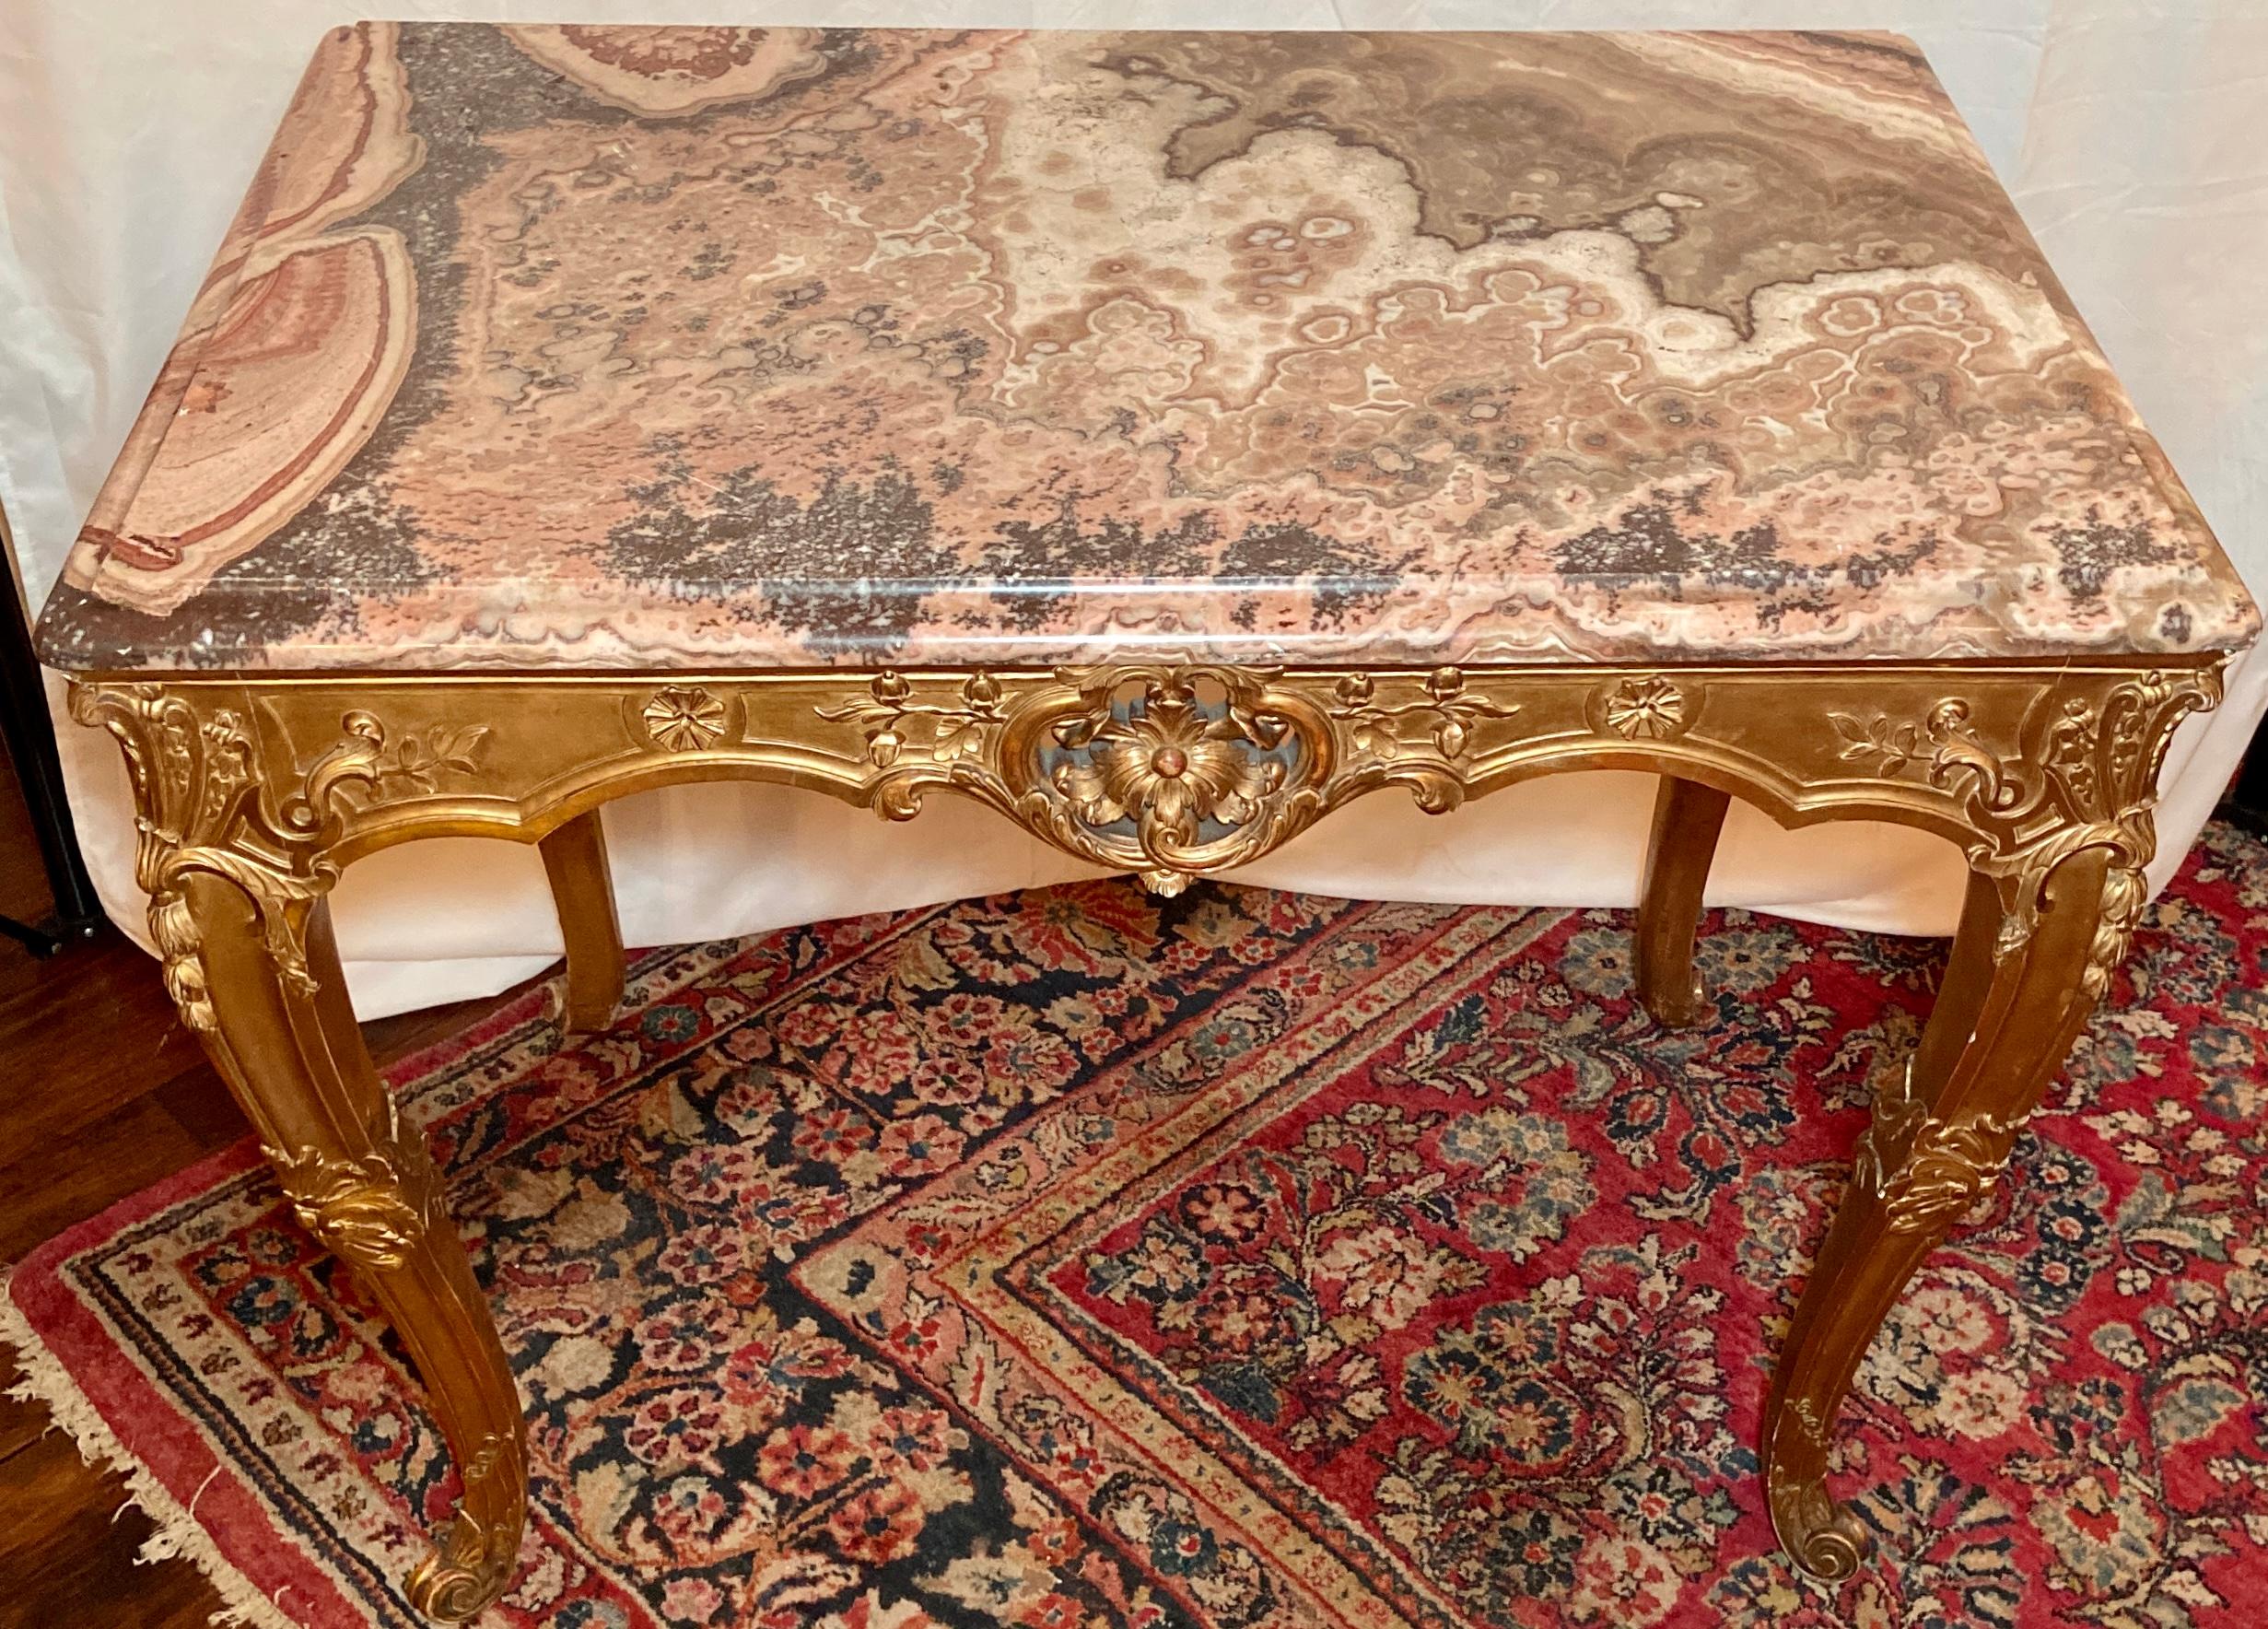 Antique French Régence carved wood center table with gold-leaf and rare marble top, Circa 1840-1850.